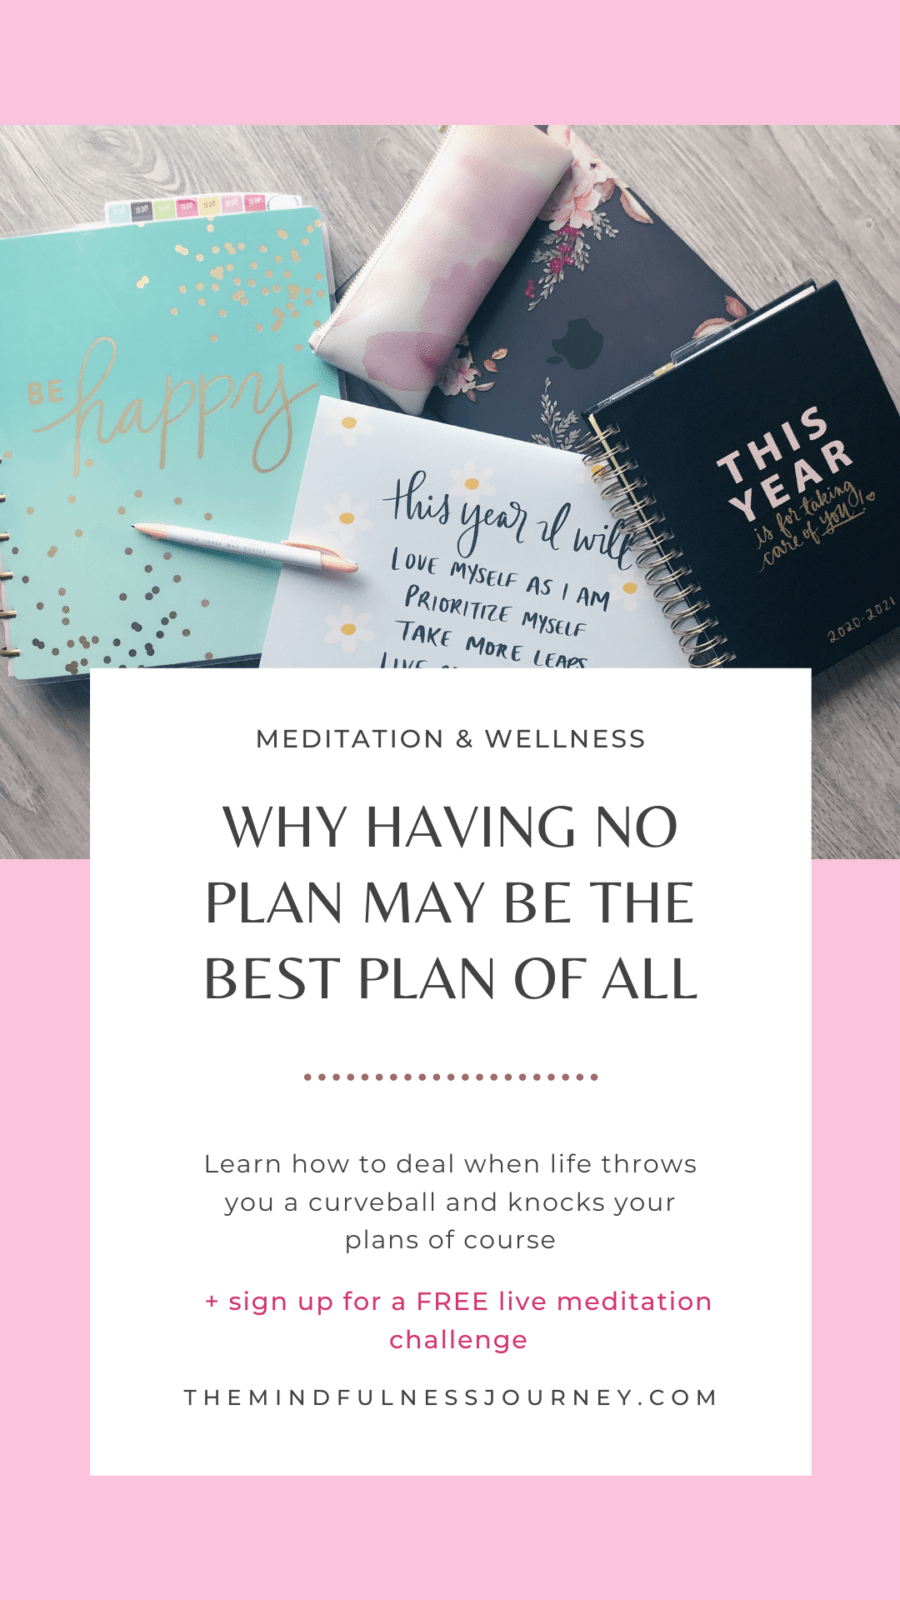 Why having no plan may be the best plan of all